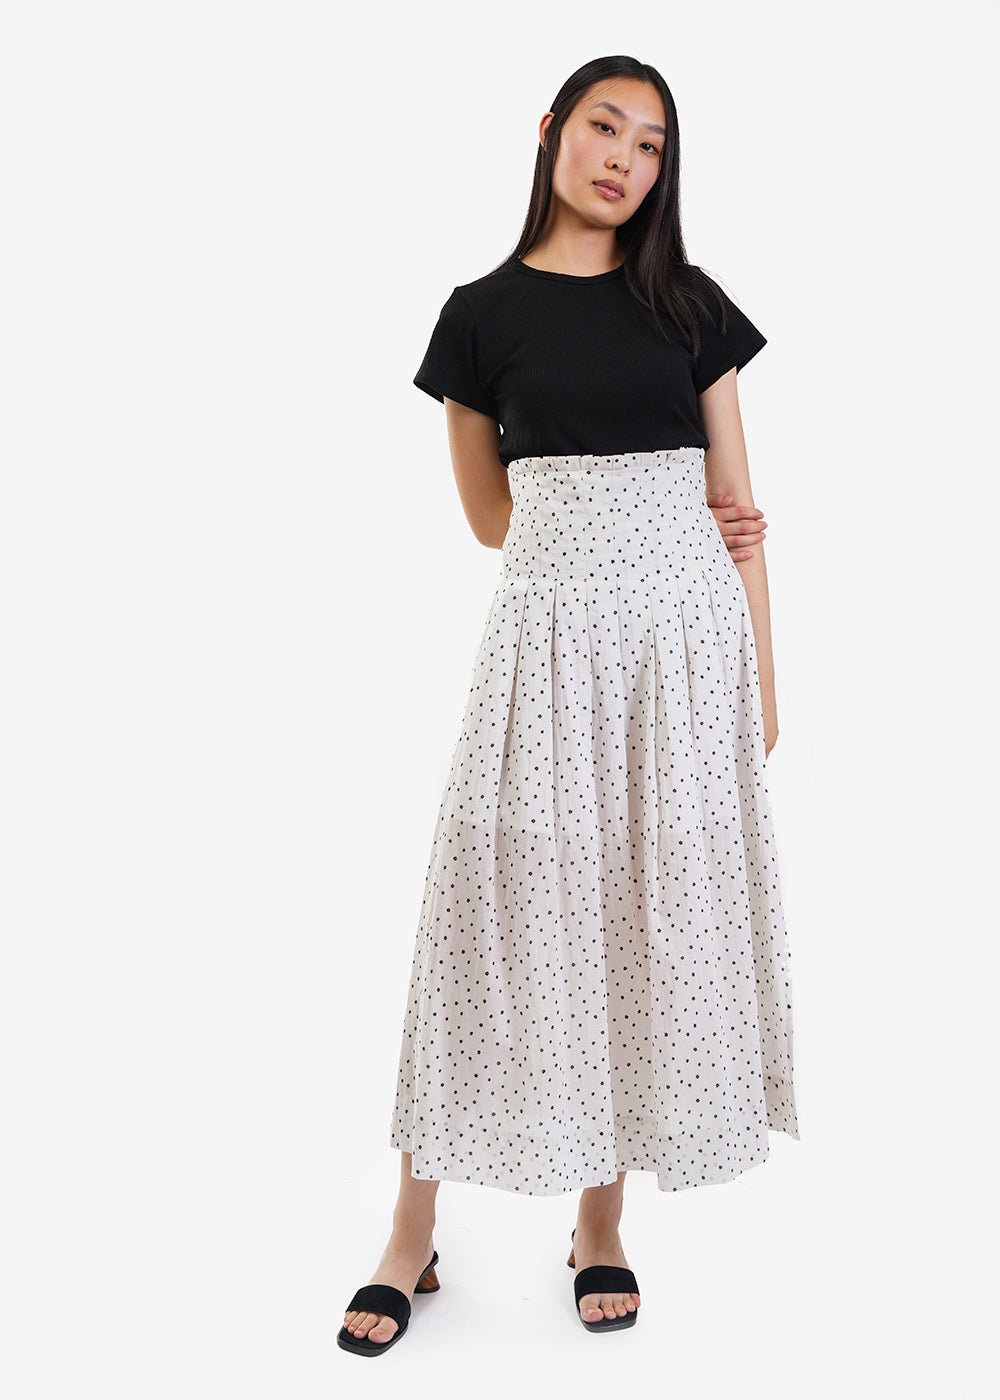 Ajaie Alaie Gather Together Skirt - New Classics Studios Sustainable Ethical Fashion Canada